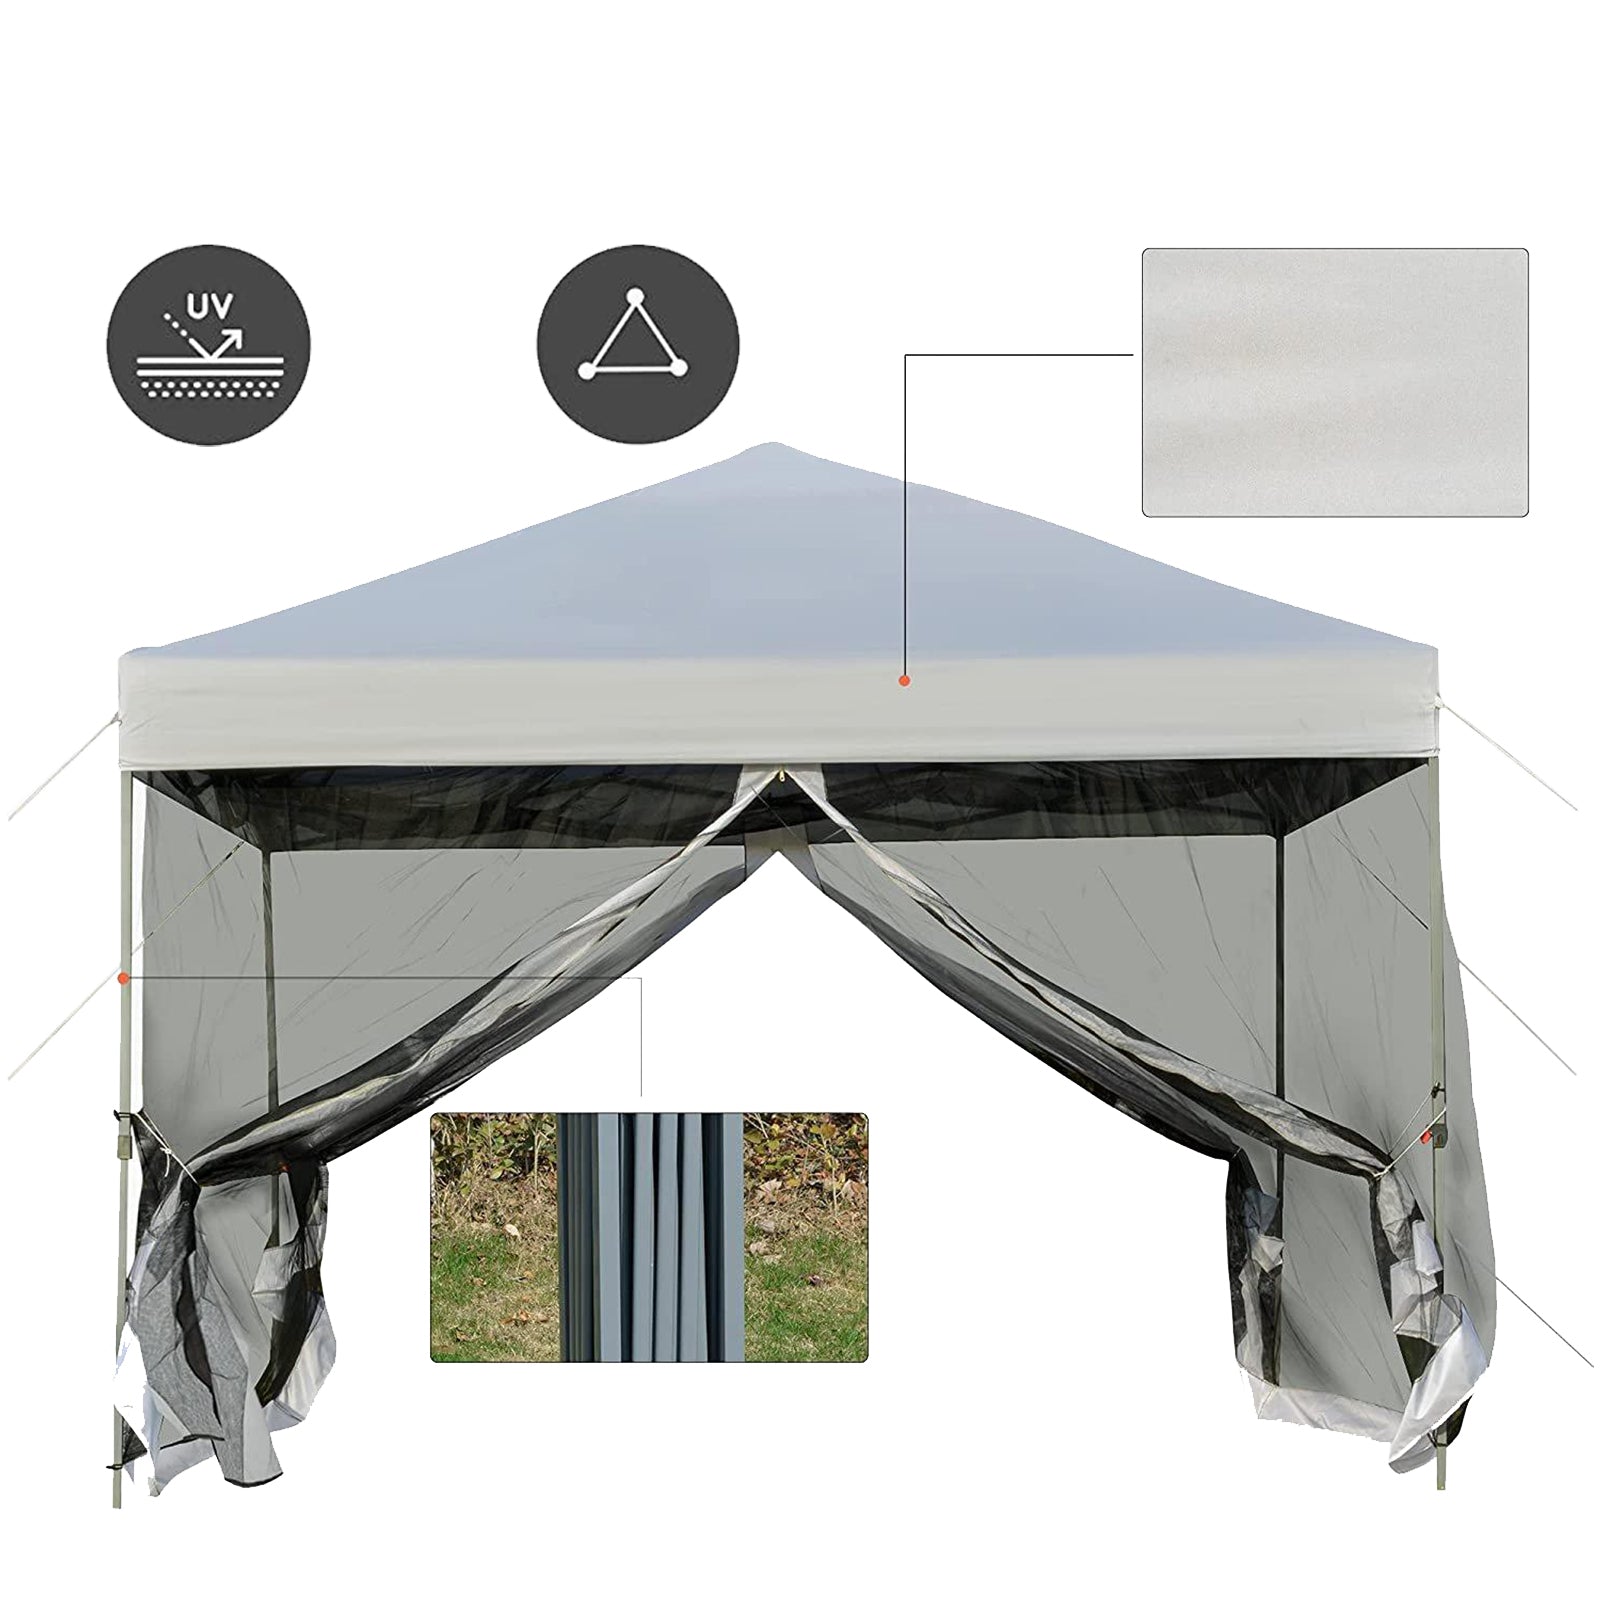 SUGIFT 10 ft. x 10 ft. White Gazebo Pop Up Canopy with Mesh Curtains